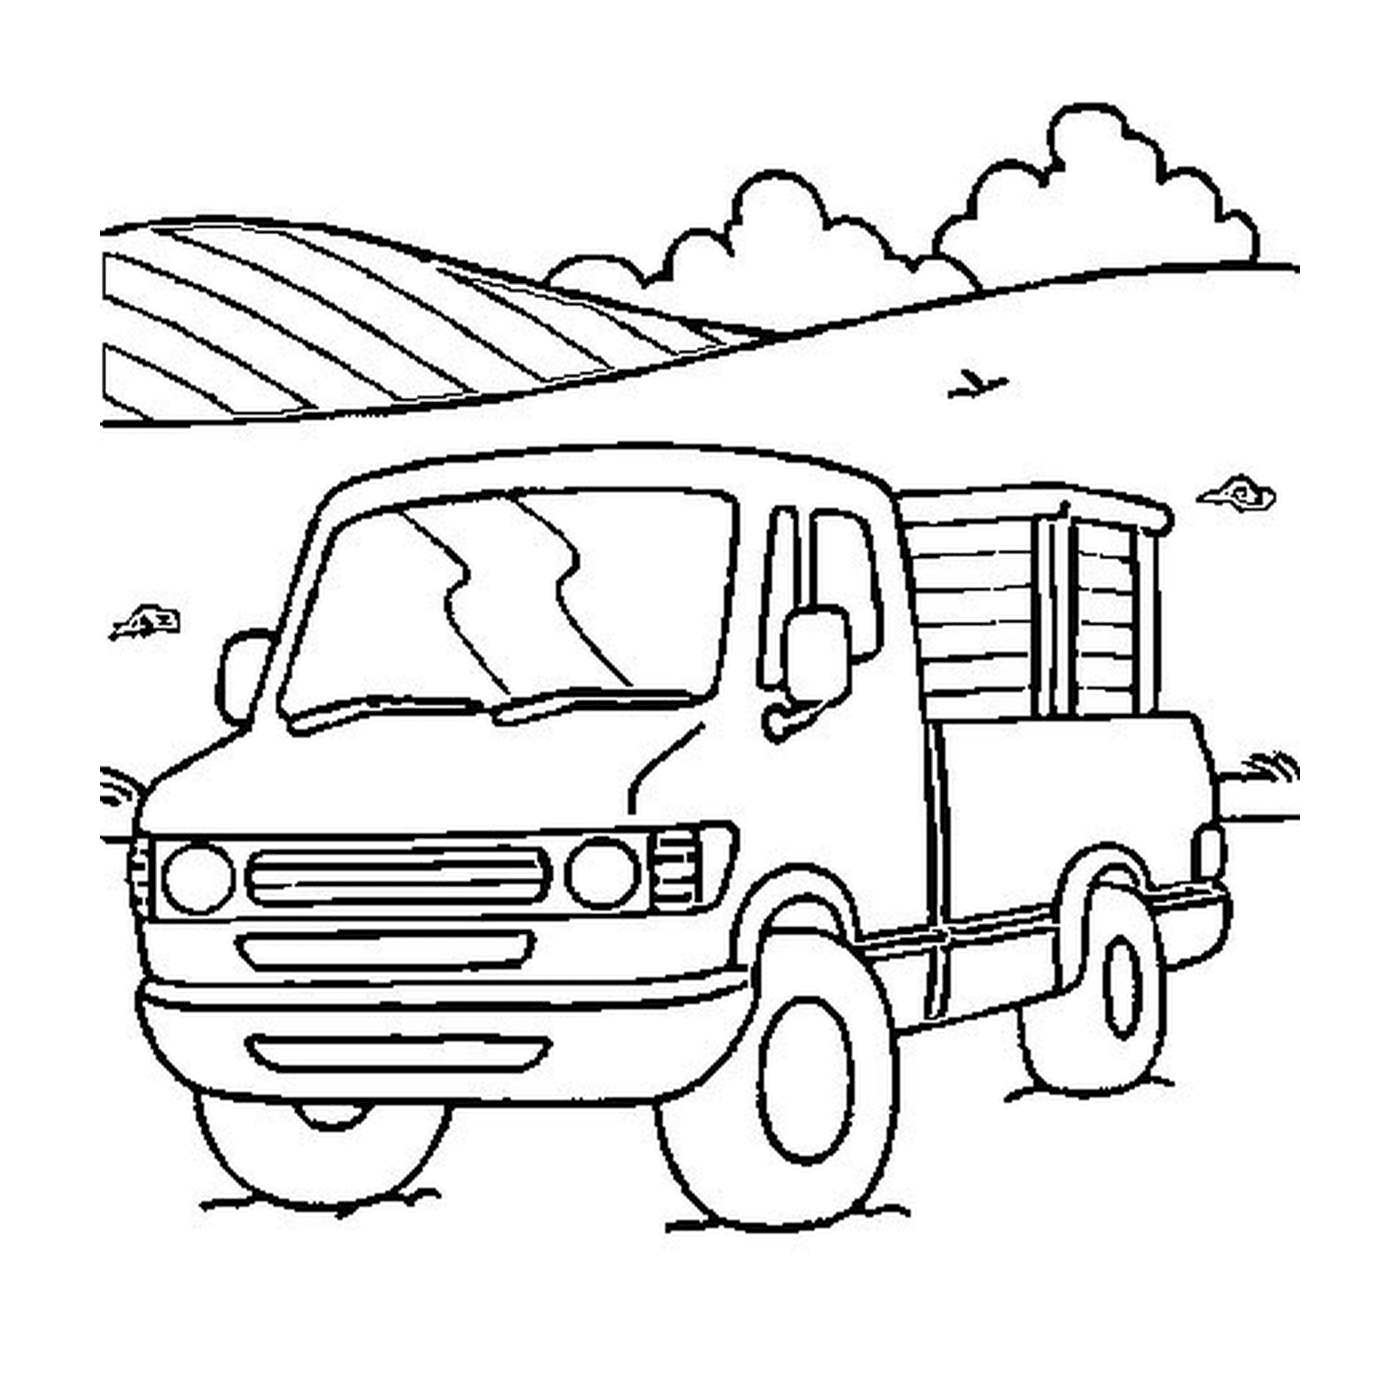  A truck parked in a field near a hill 